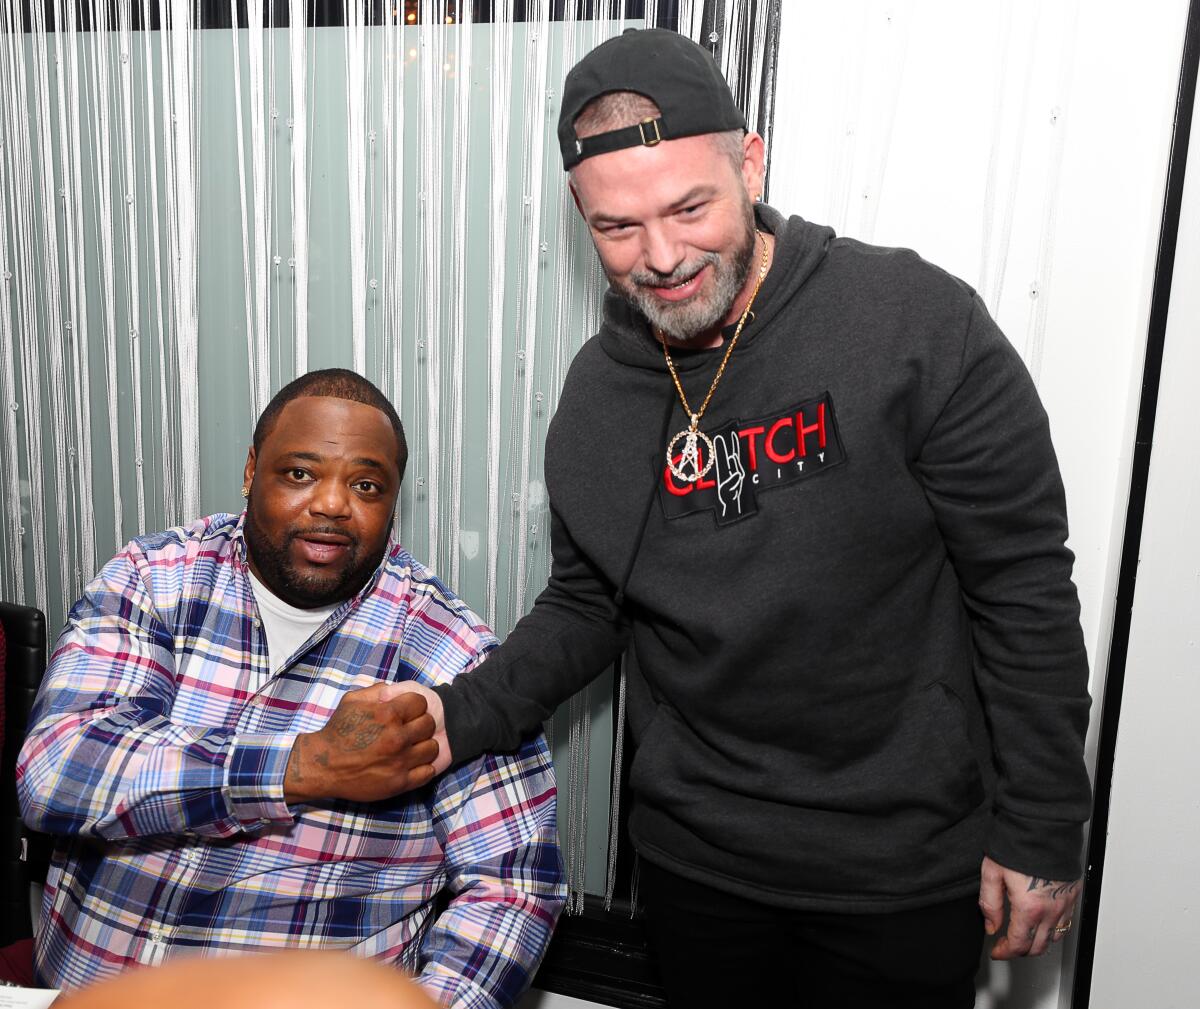 Big Pokey sits and shakes hands with Paul Wall, who is standing.